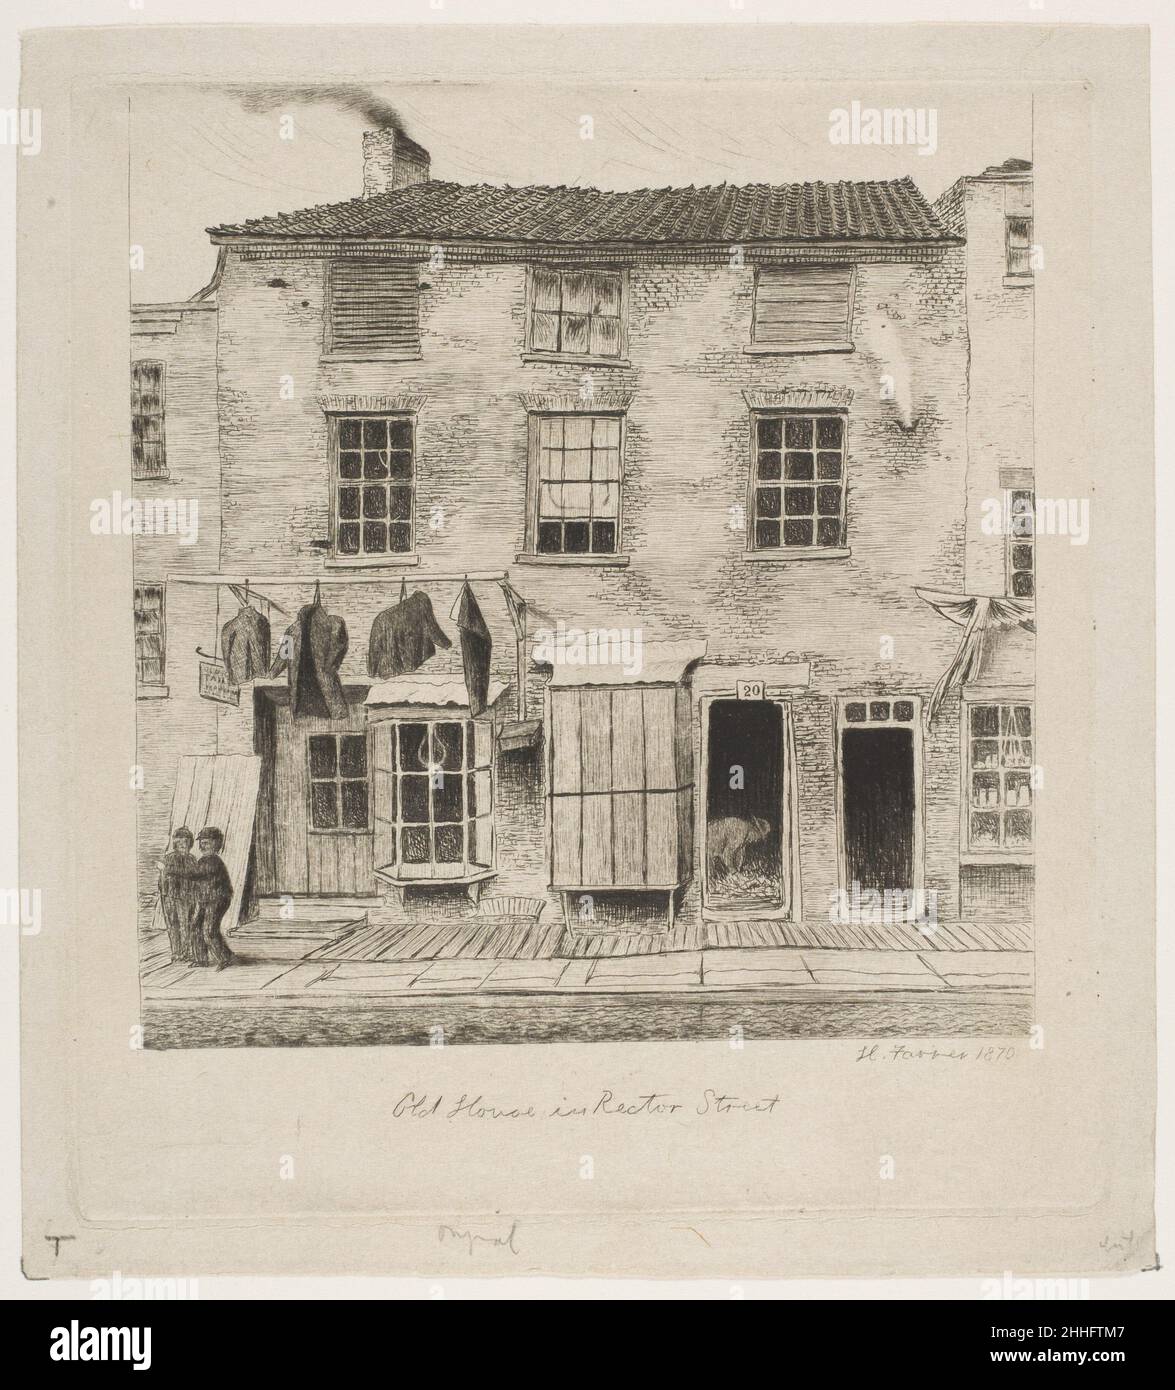 Old House in Rector Street (from Scenes of Old New York) 1870 Henry Farrer American. Old House in Rector Street (from Scenes of Old New York)  380981 Artist: Henry Farrer, American, London 1844?1903 New York, Old House in Rector Street (from Scenes of Old New York), 1870, Etching, plate: 6 x 5 3/8 in. (15.2 x 13.7 cm) sheet: 6 5/8 x 6 in. (16.8 x 15.2 cm). The Metropolitan Museum of Art, New York. The Edward W. C. Arnold Collection of New York Prints, Maps and Pictures, Bequest of Edward W. C. Arnold, 1954 (54.90.919) Stock Photo